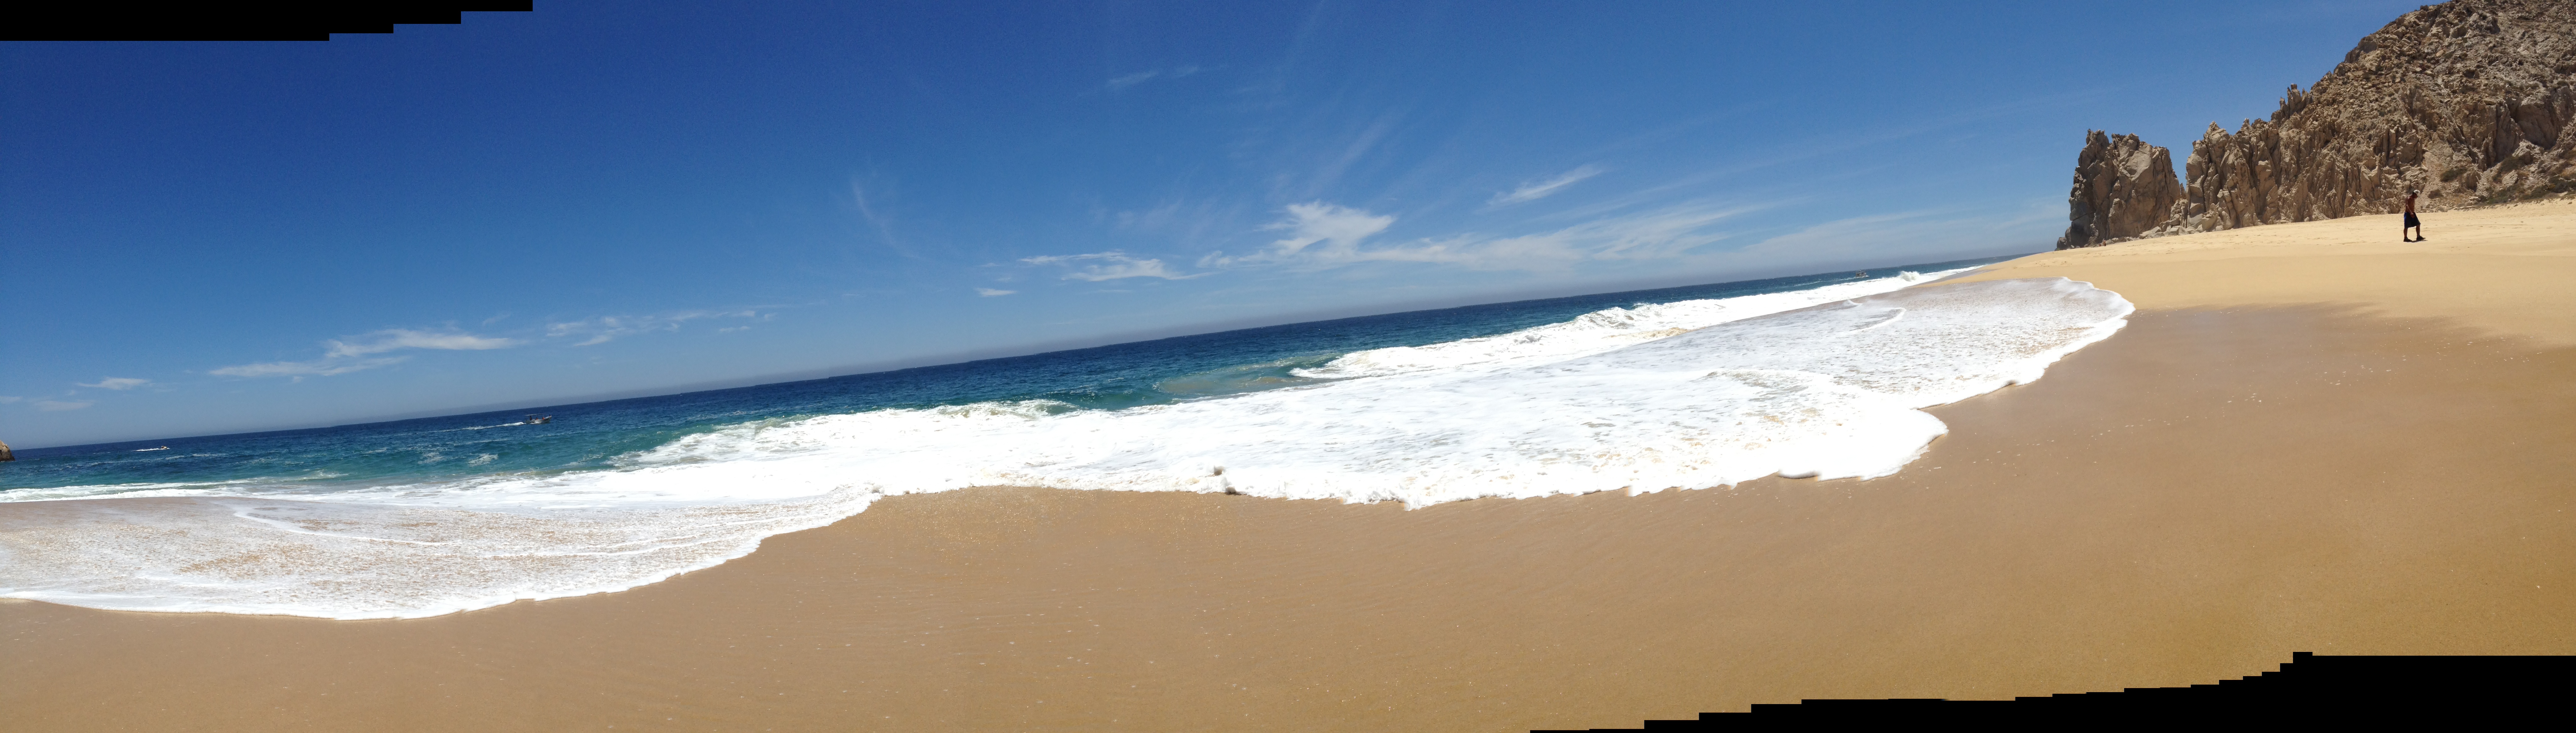 cabo pacific panorama